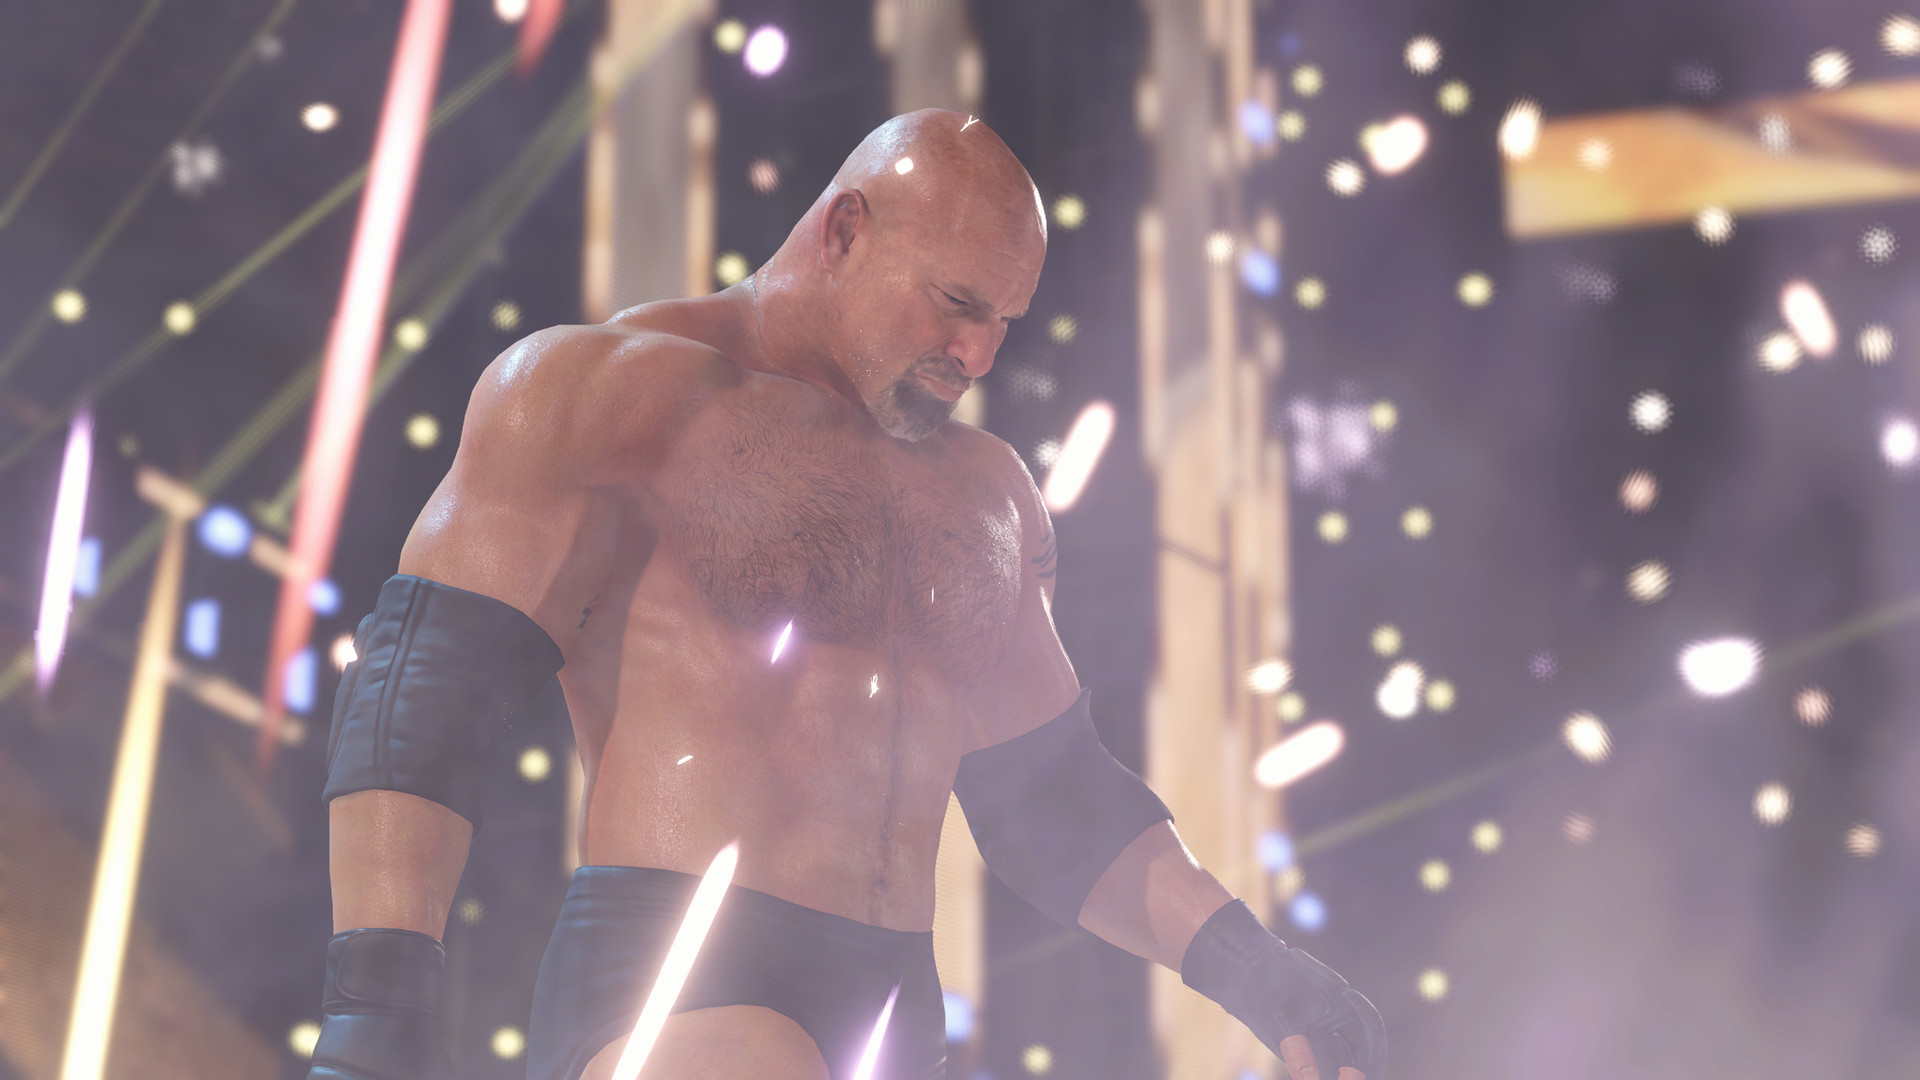 WWE 2K22 APK Download Latest Version for Android & iOS